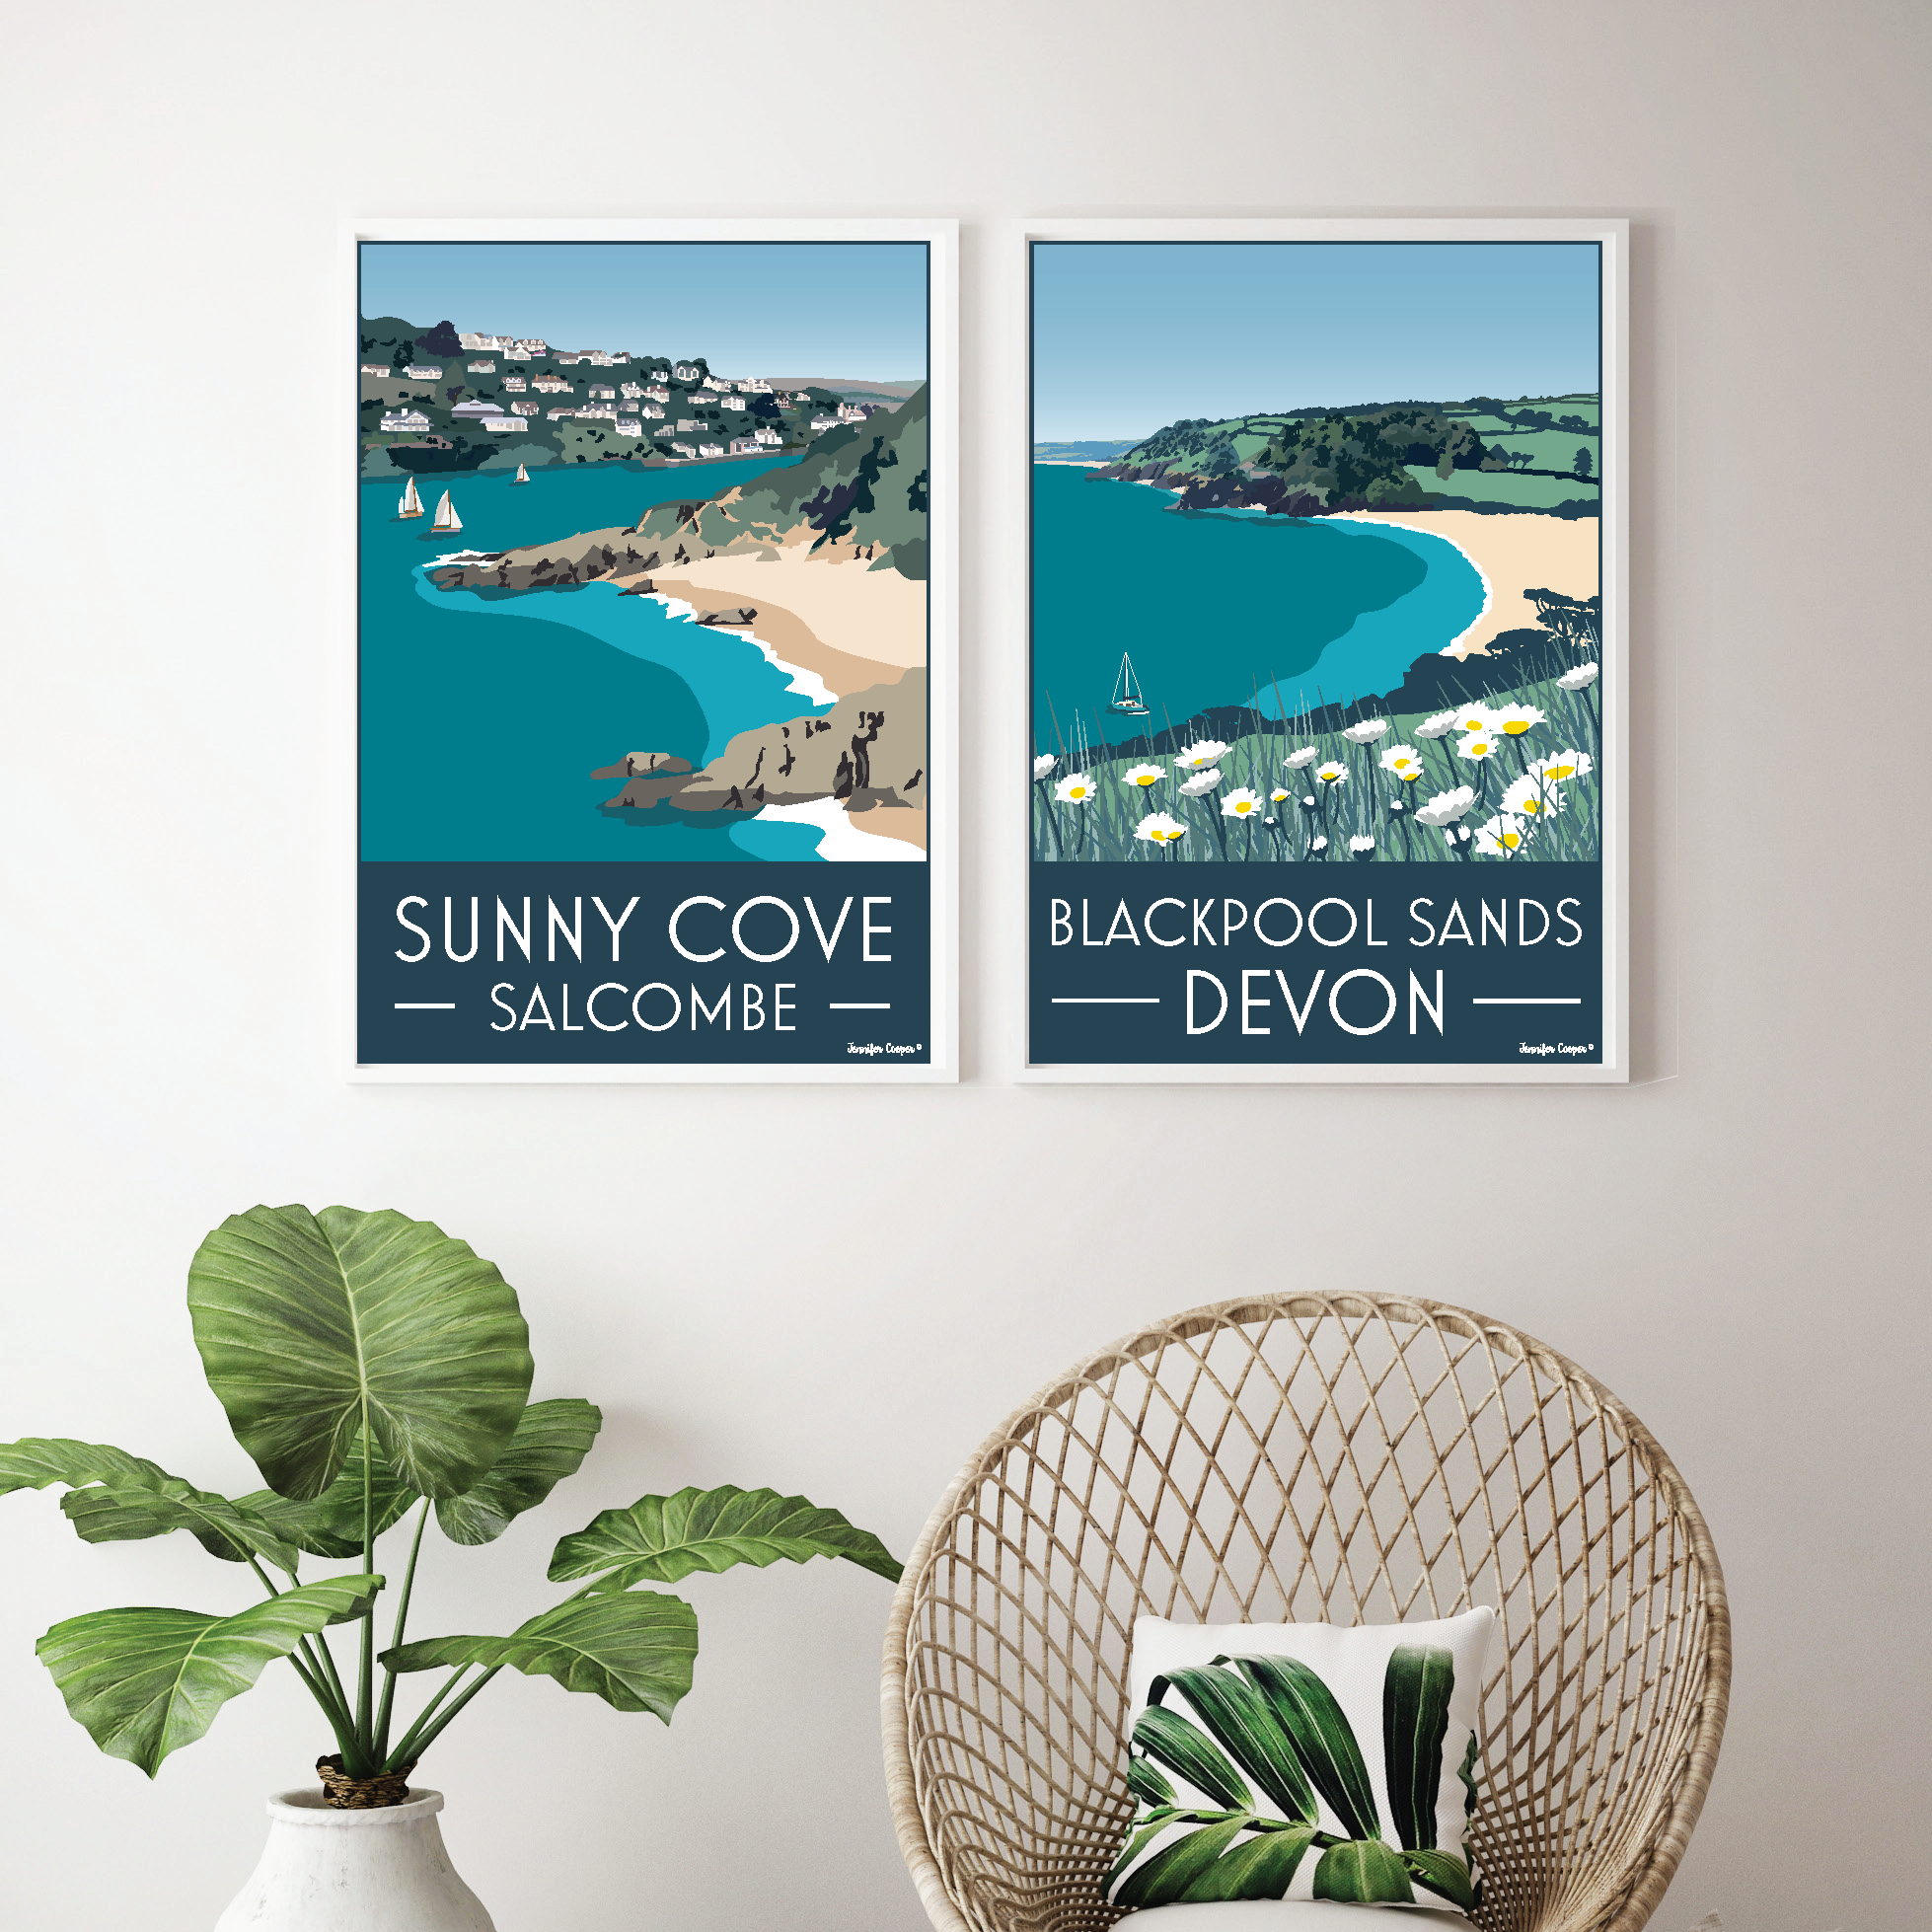 Sunny Cove and Salcombe